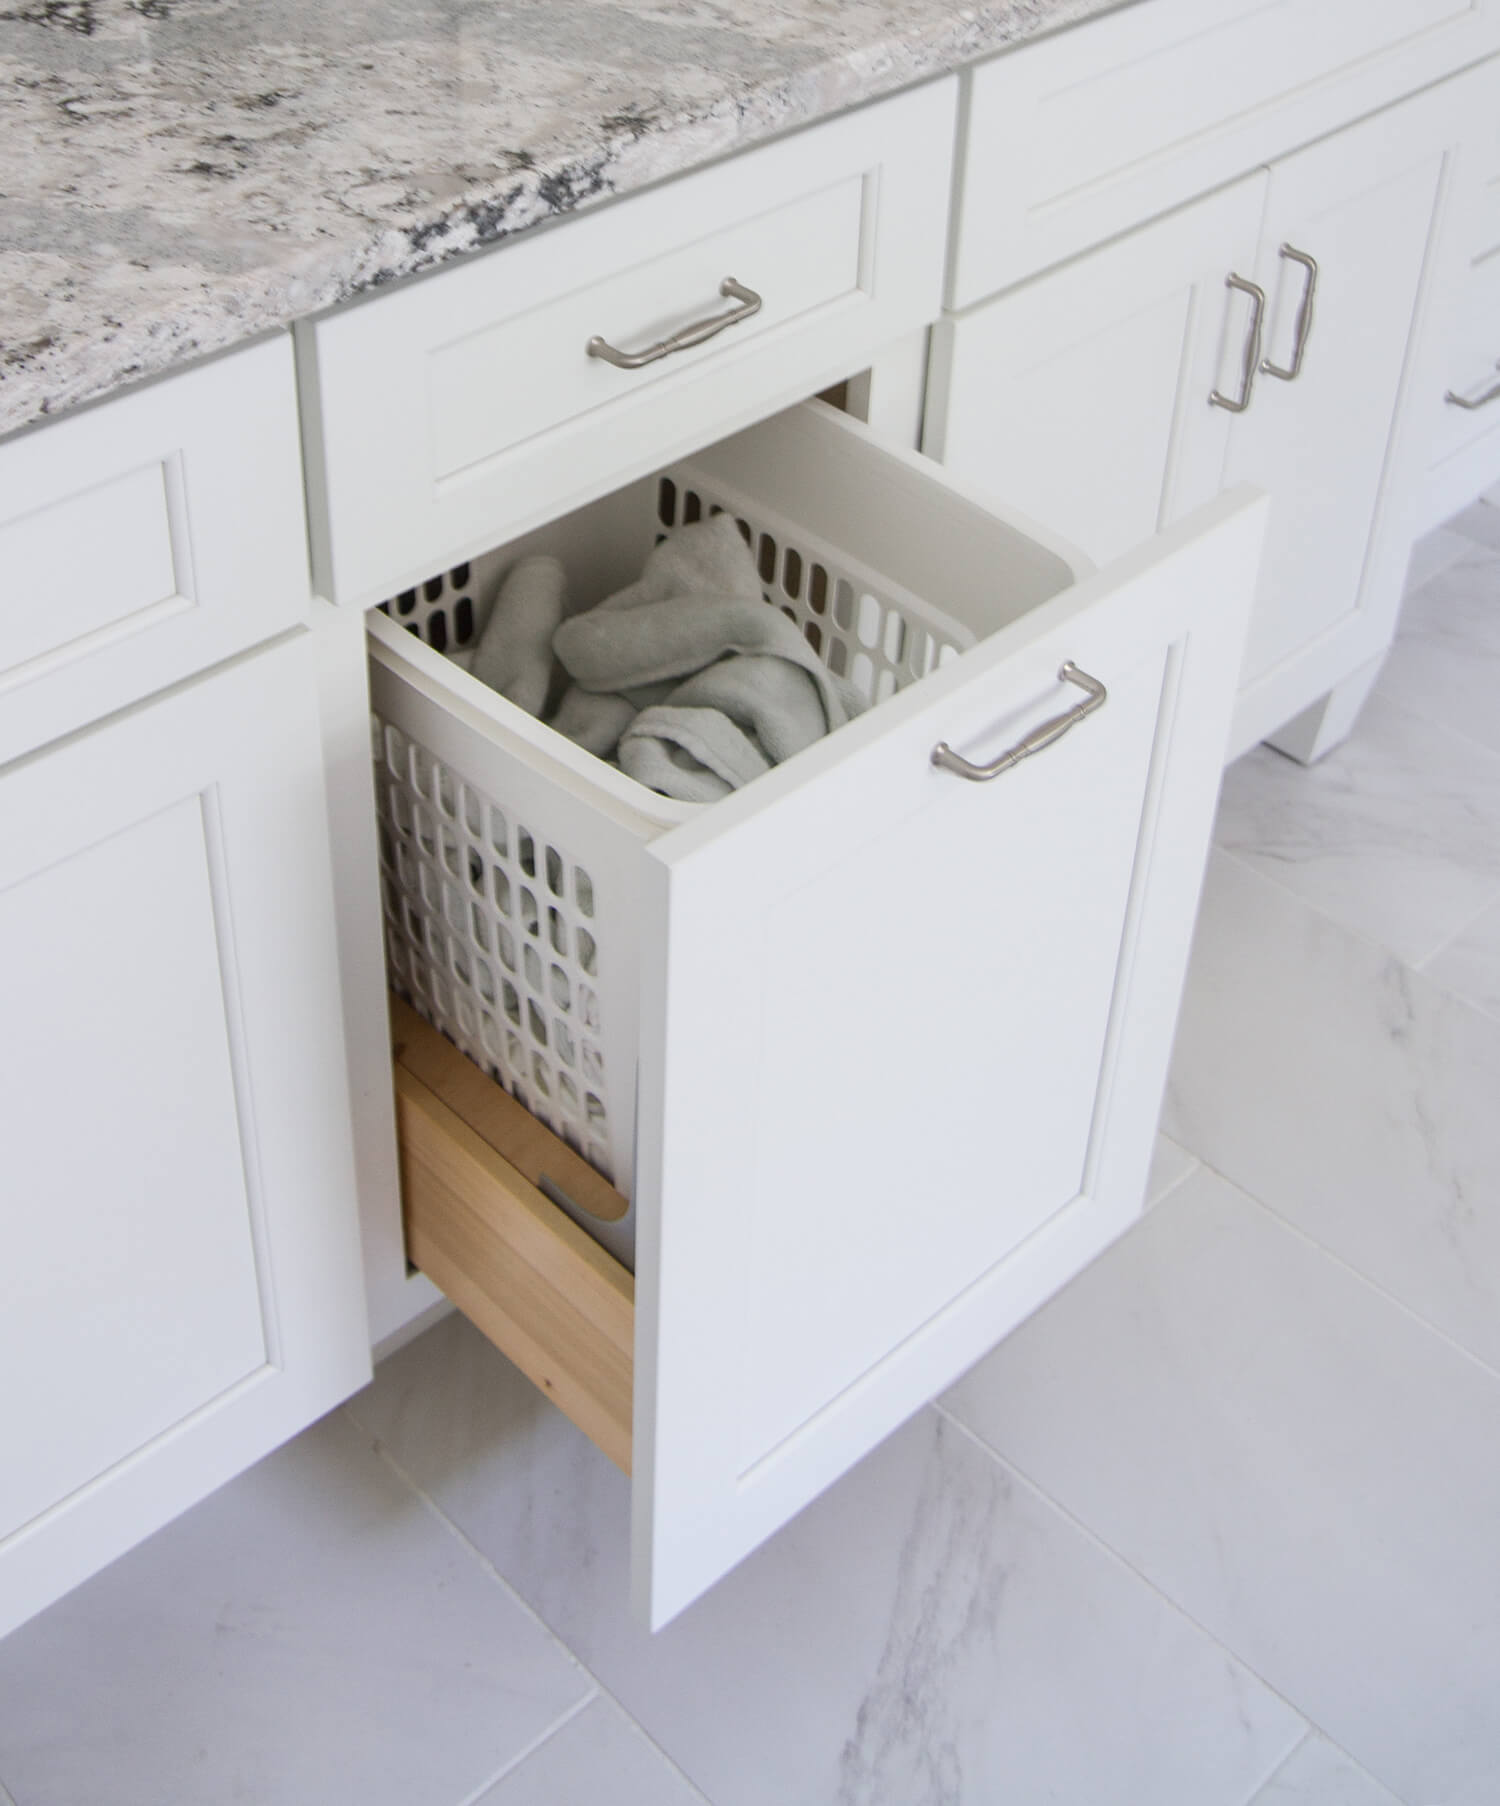 A bright white cabinet with a laundry bin pull-out storage accessory.